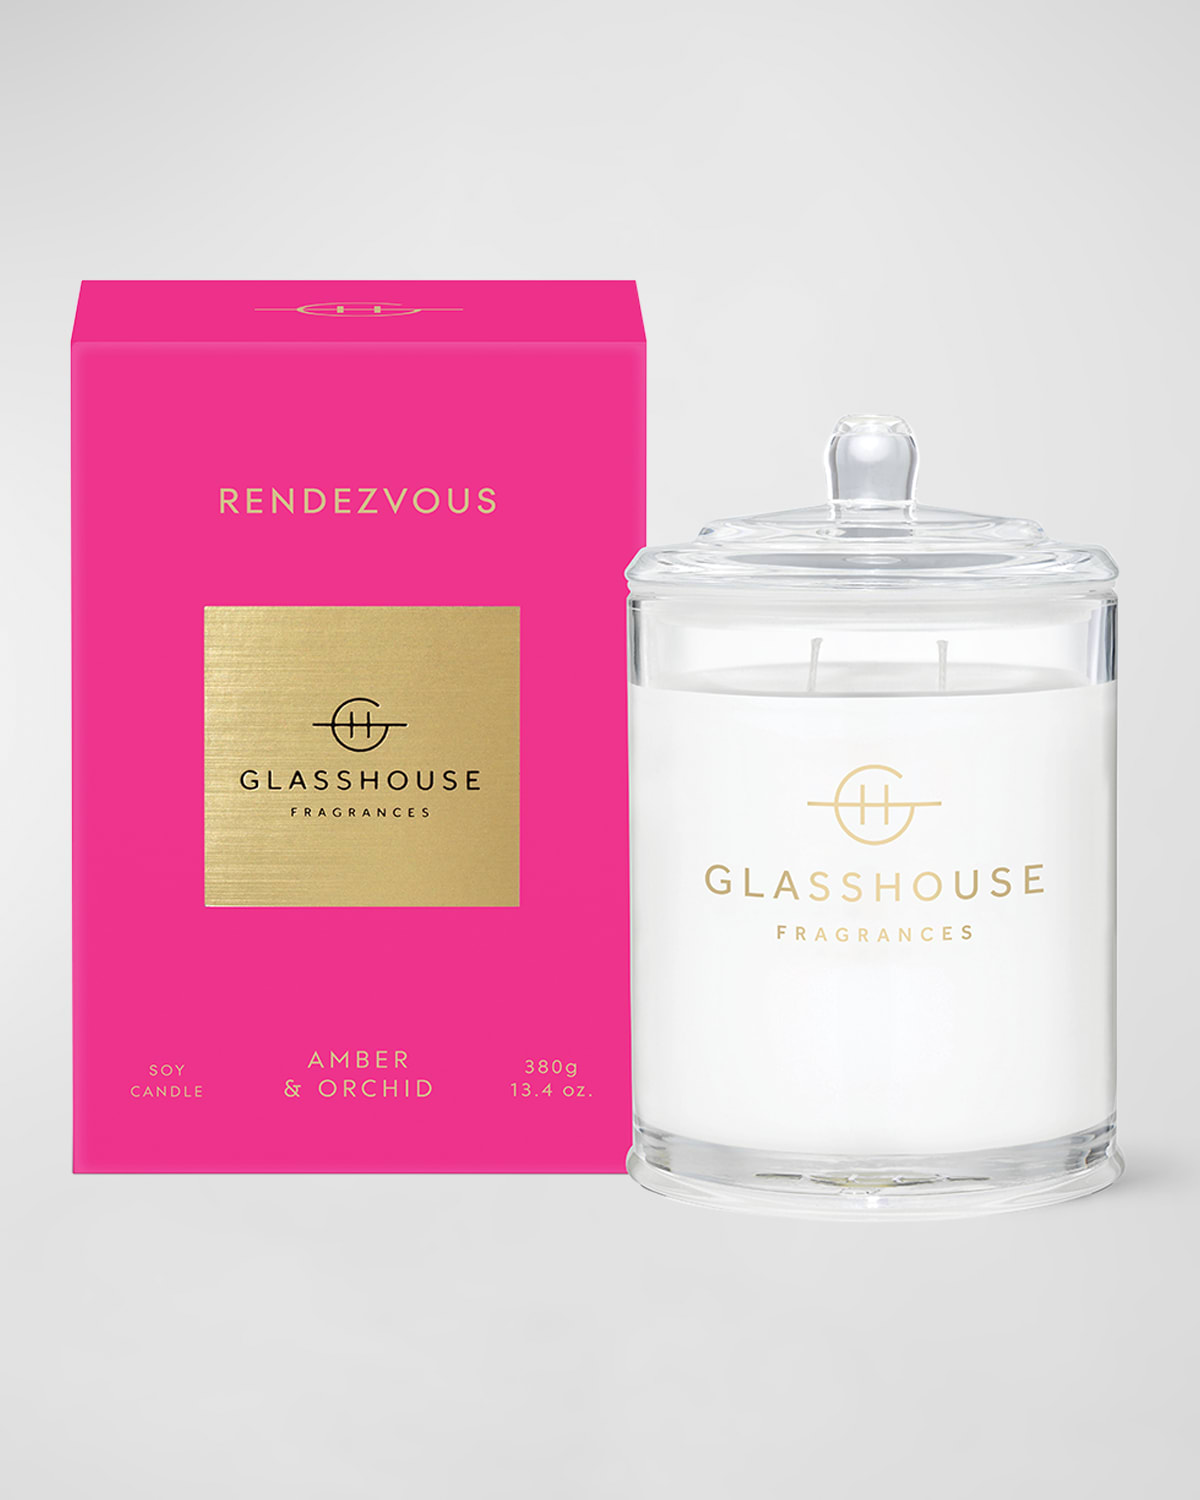 Glasshouse Fragrances 13.4 Oz. Rendezvous Scented Candle